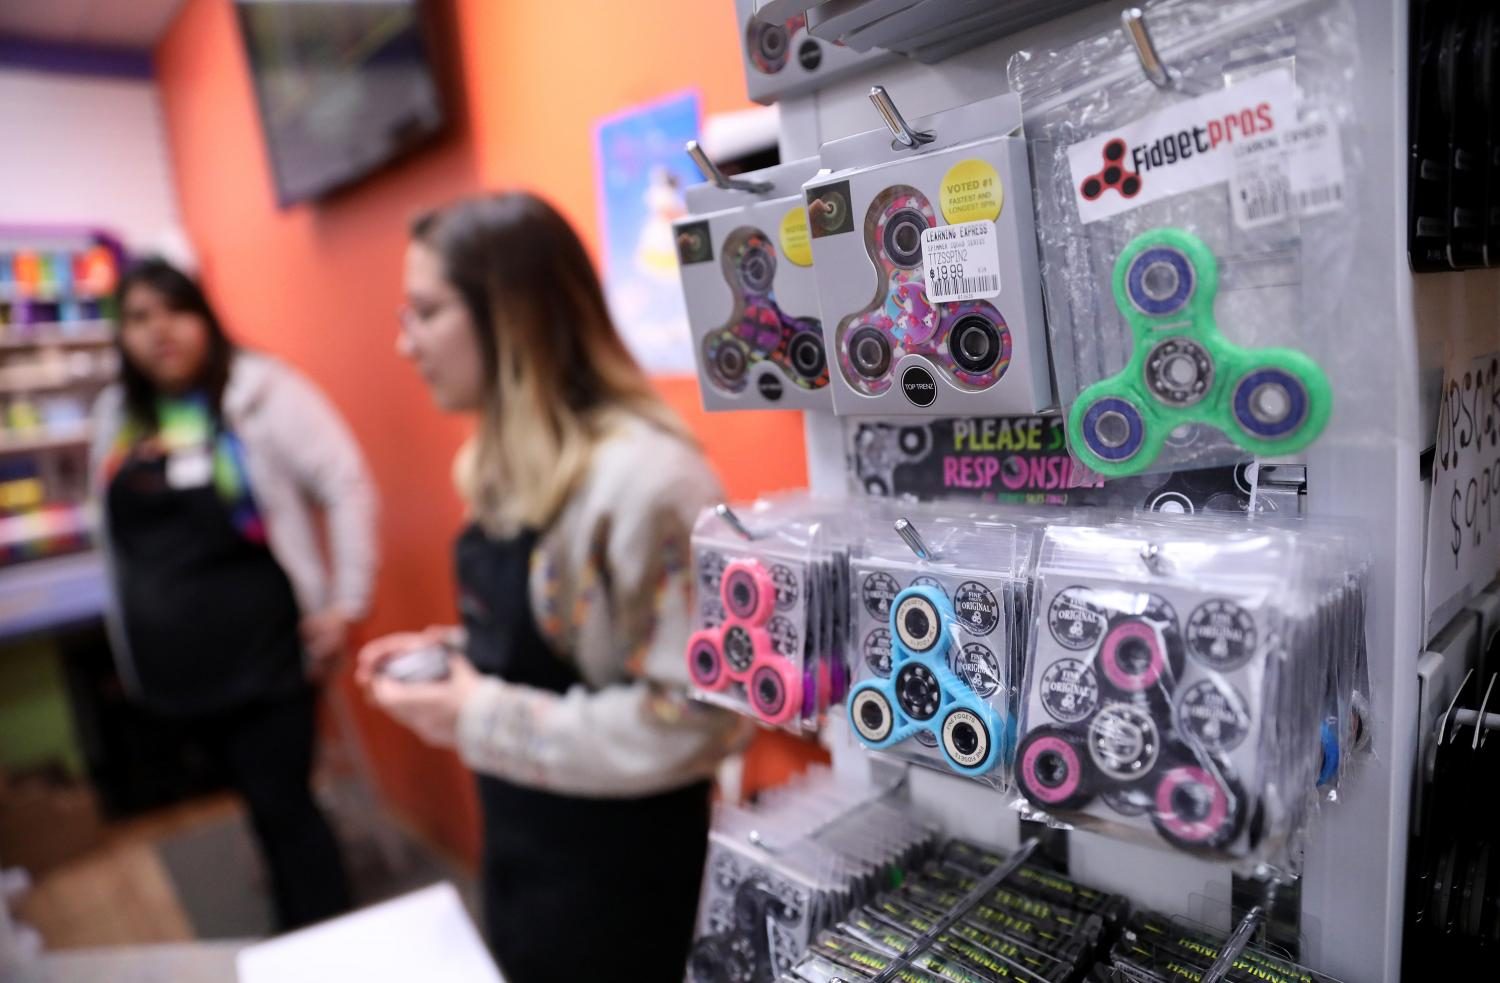 Fidget spinners can gained a momentum of popularity.